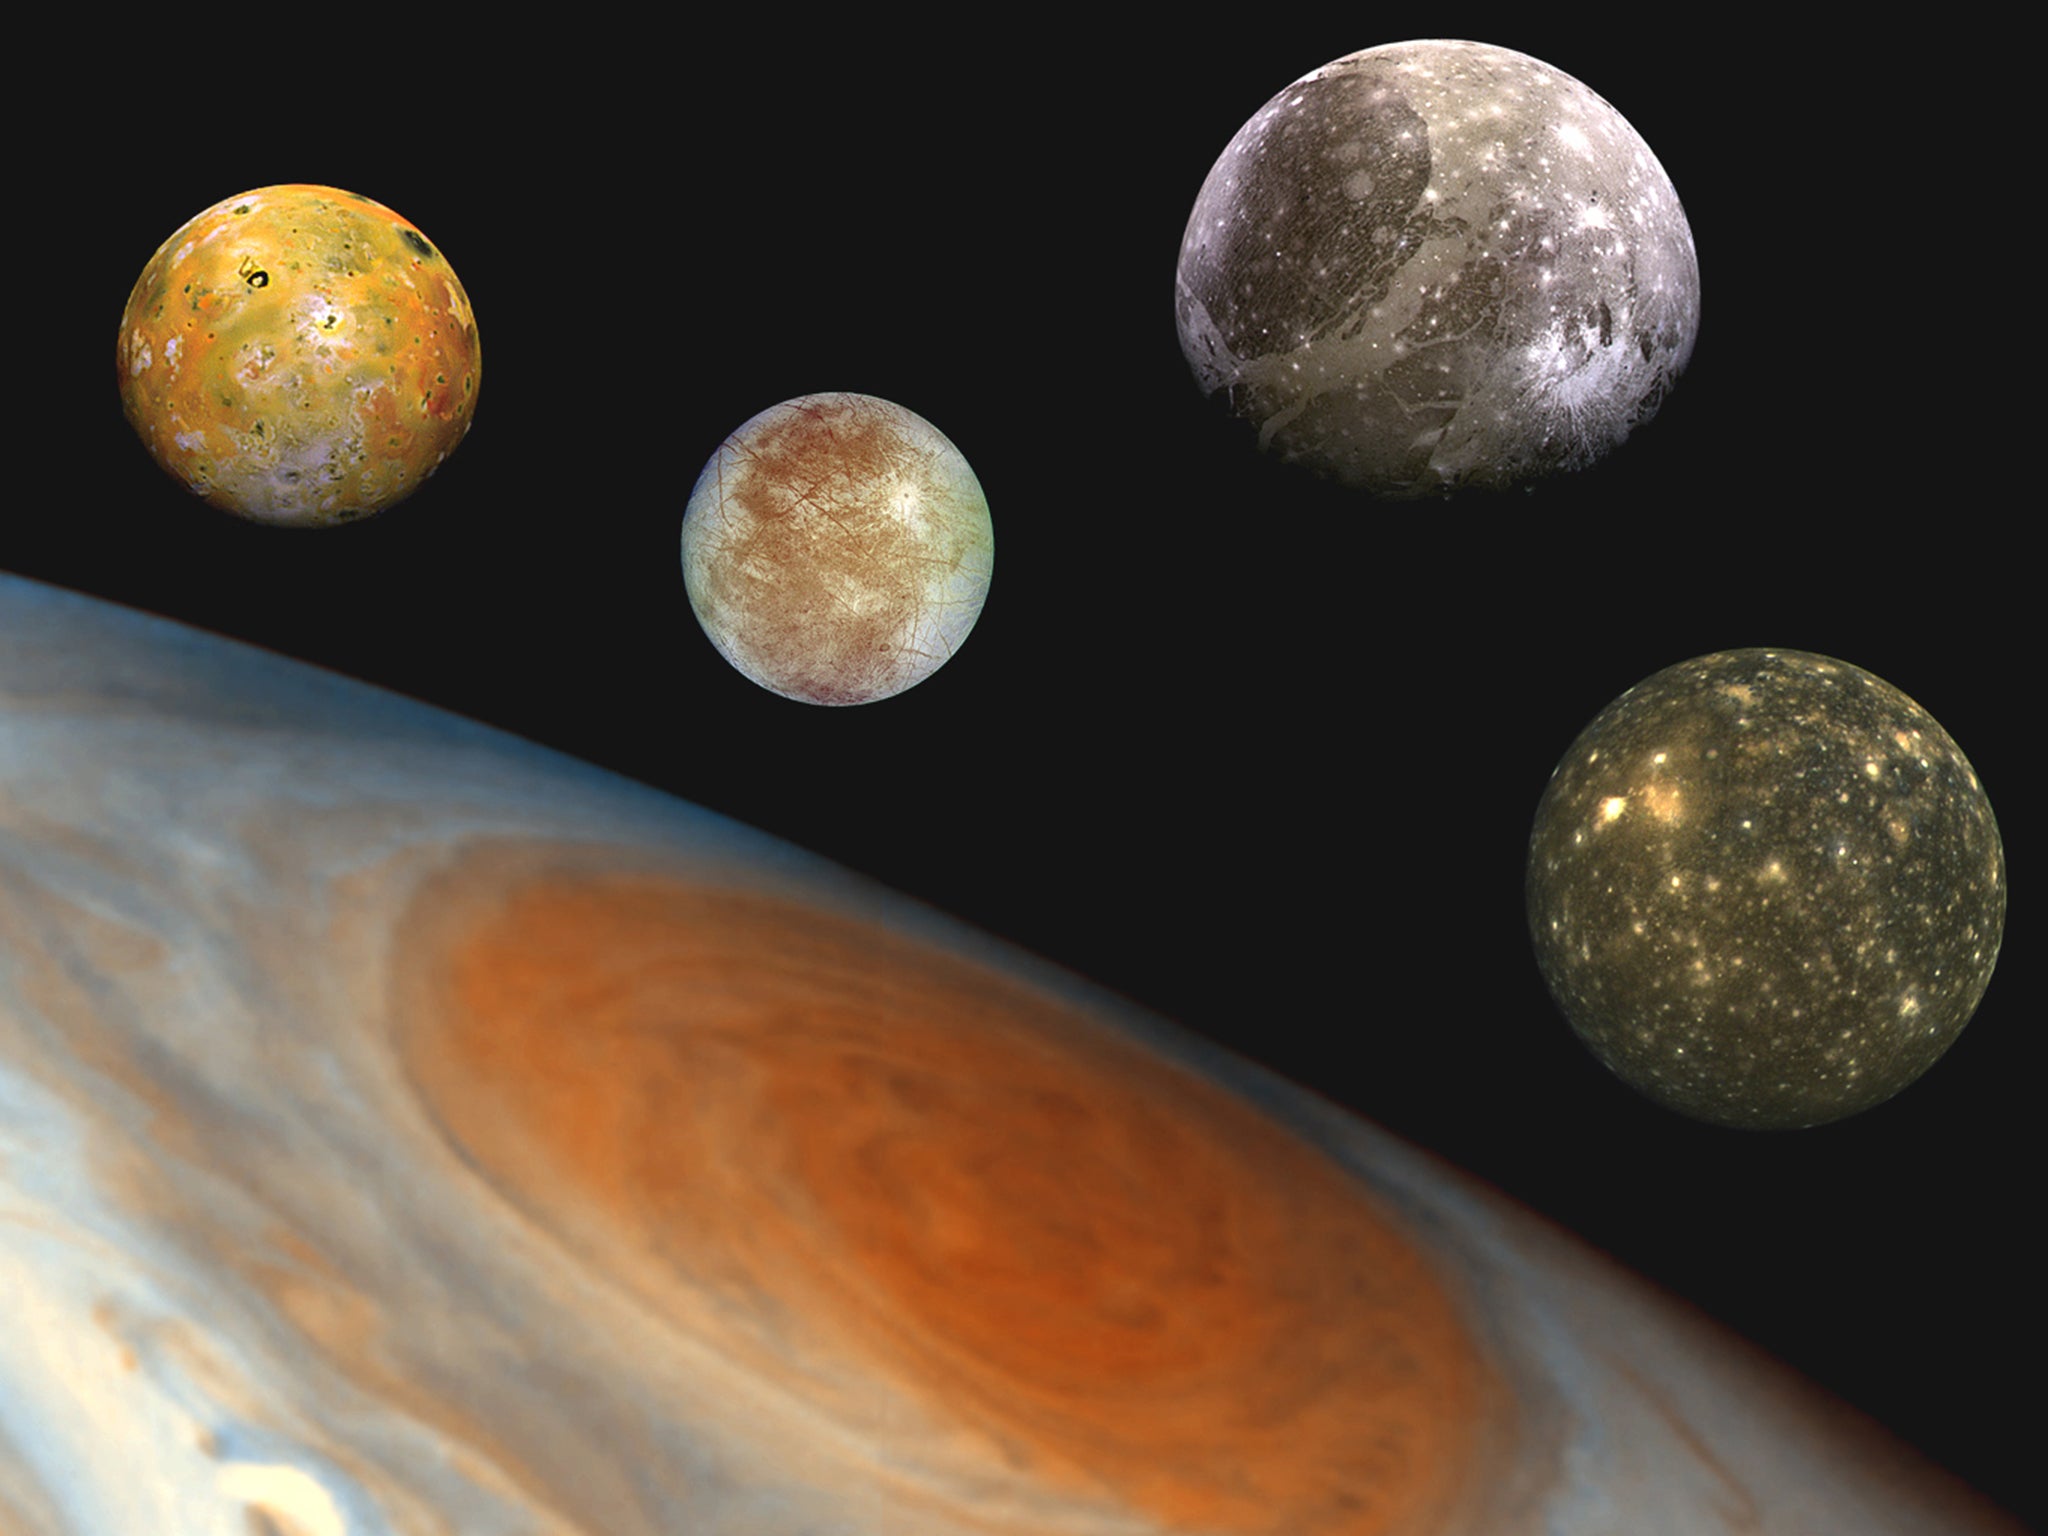 At 143,000km across, Jupiter is the biggest planet in the solar system